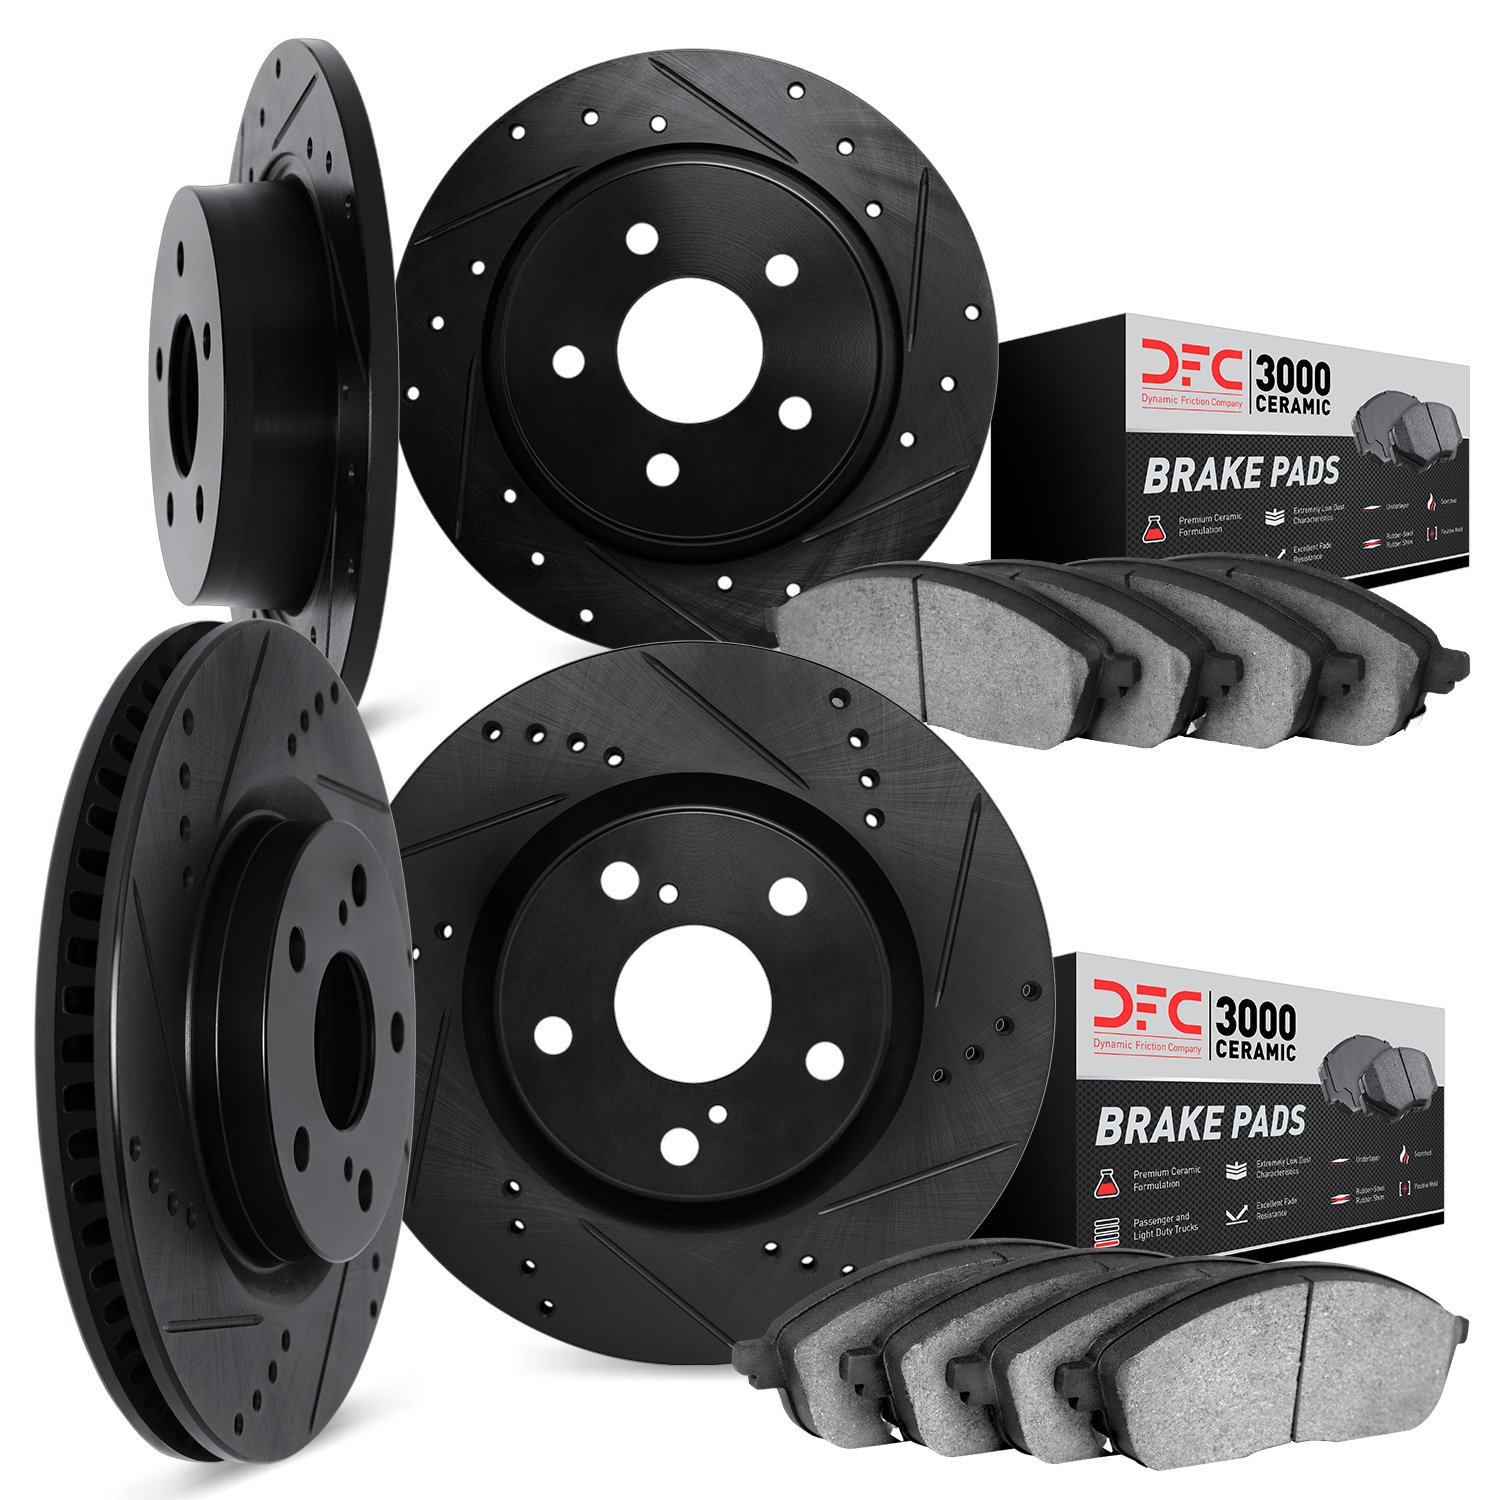 8304-40008 Drilled/Slotted Brake Rotors with 3000-Series Ceramic Brake Pads Kit [Black], 1992-1992 Mopar, Position: Front and Re